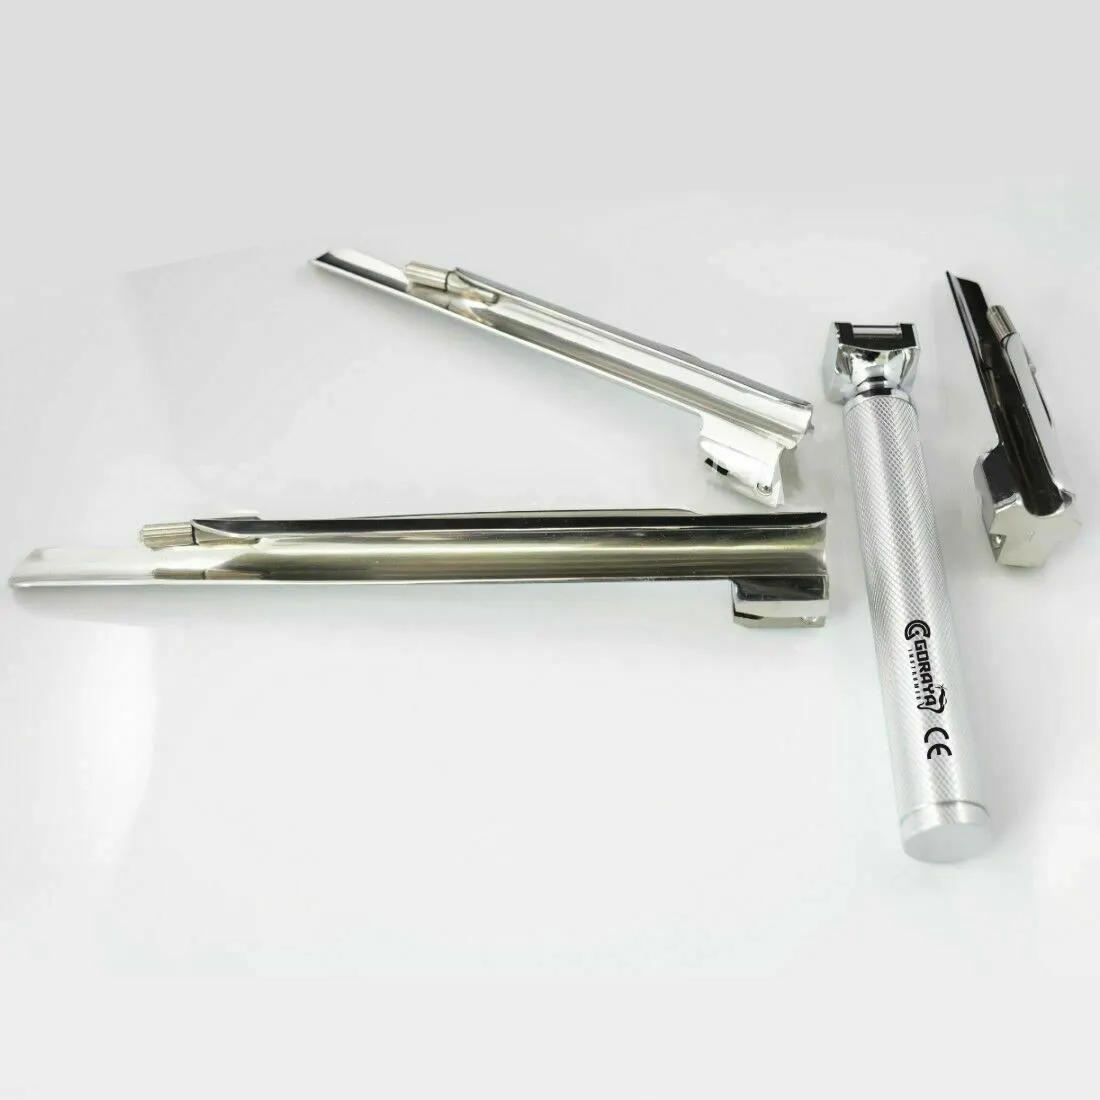 HOT SALE GORAYA GERMAN Miller Laryngoscope Set Surgical Veterinary Instruments 3 Blades 1 Small Handle CE ISO APPROVED